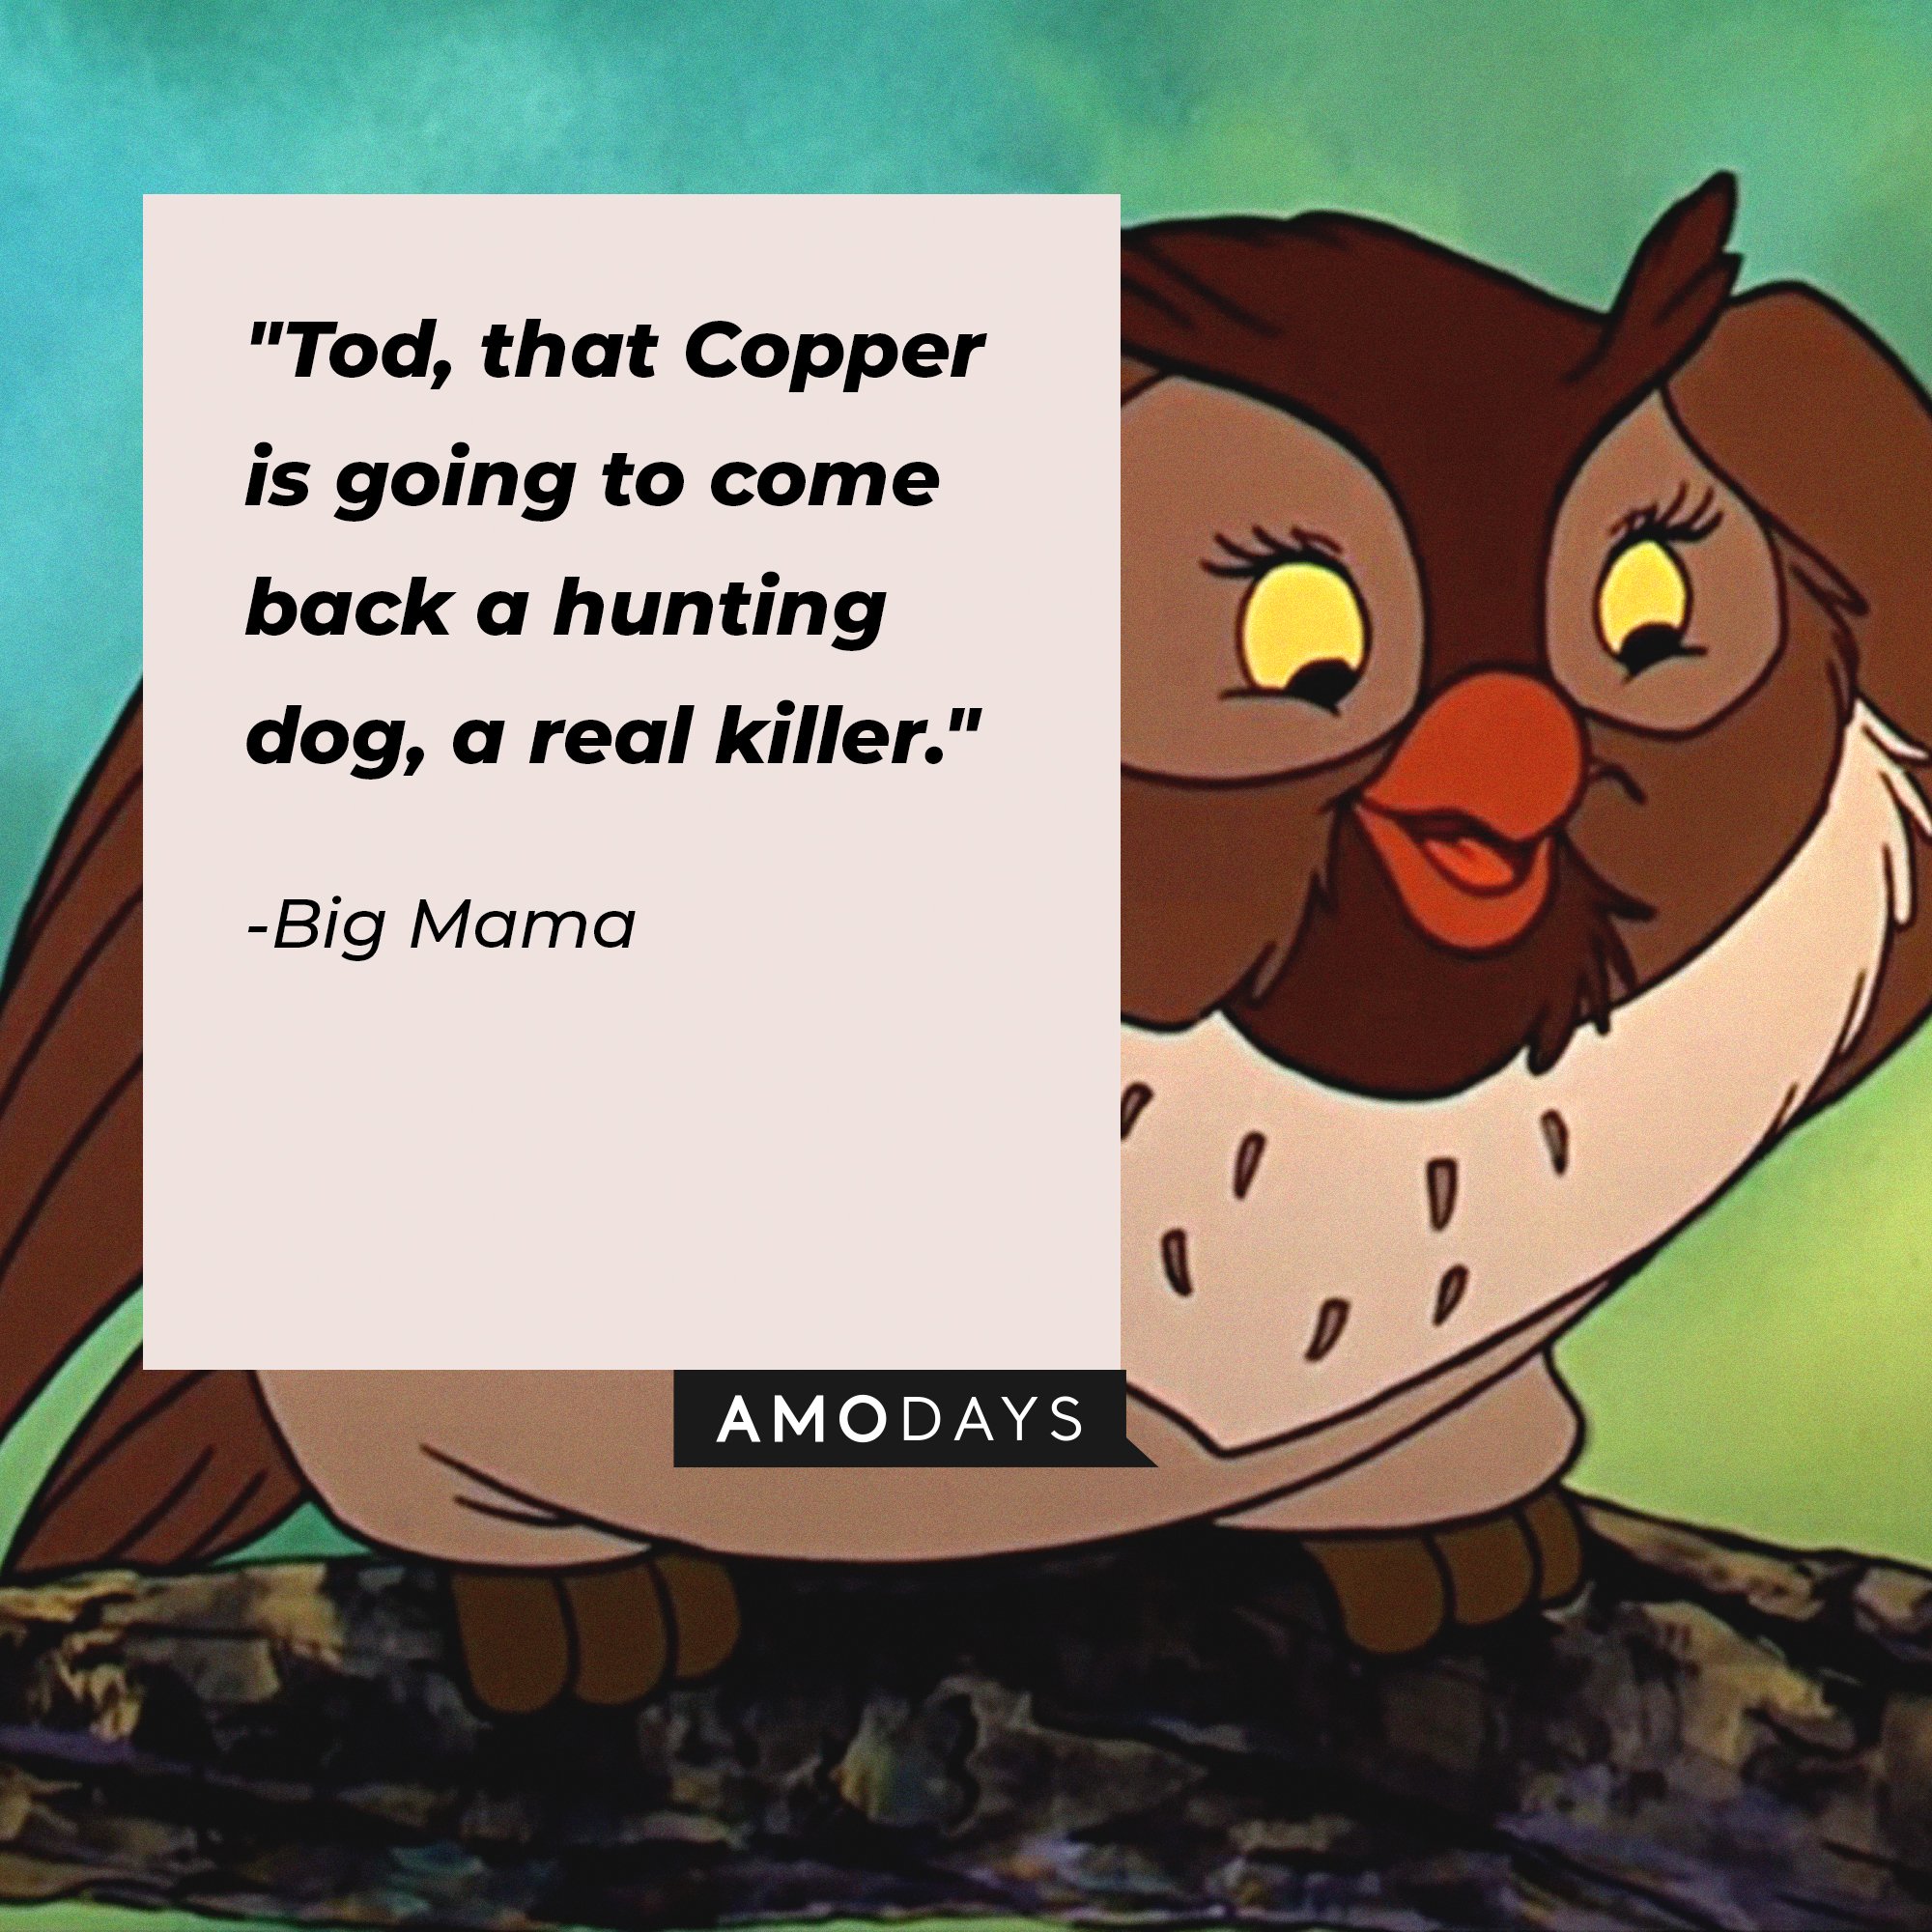 Big Mama’s quote: "Tod, that Copper is going to come back a hunting dog, a real killer." | Image: AmoDays